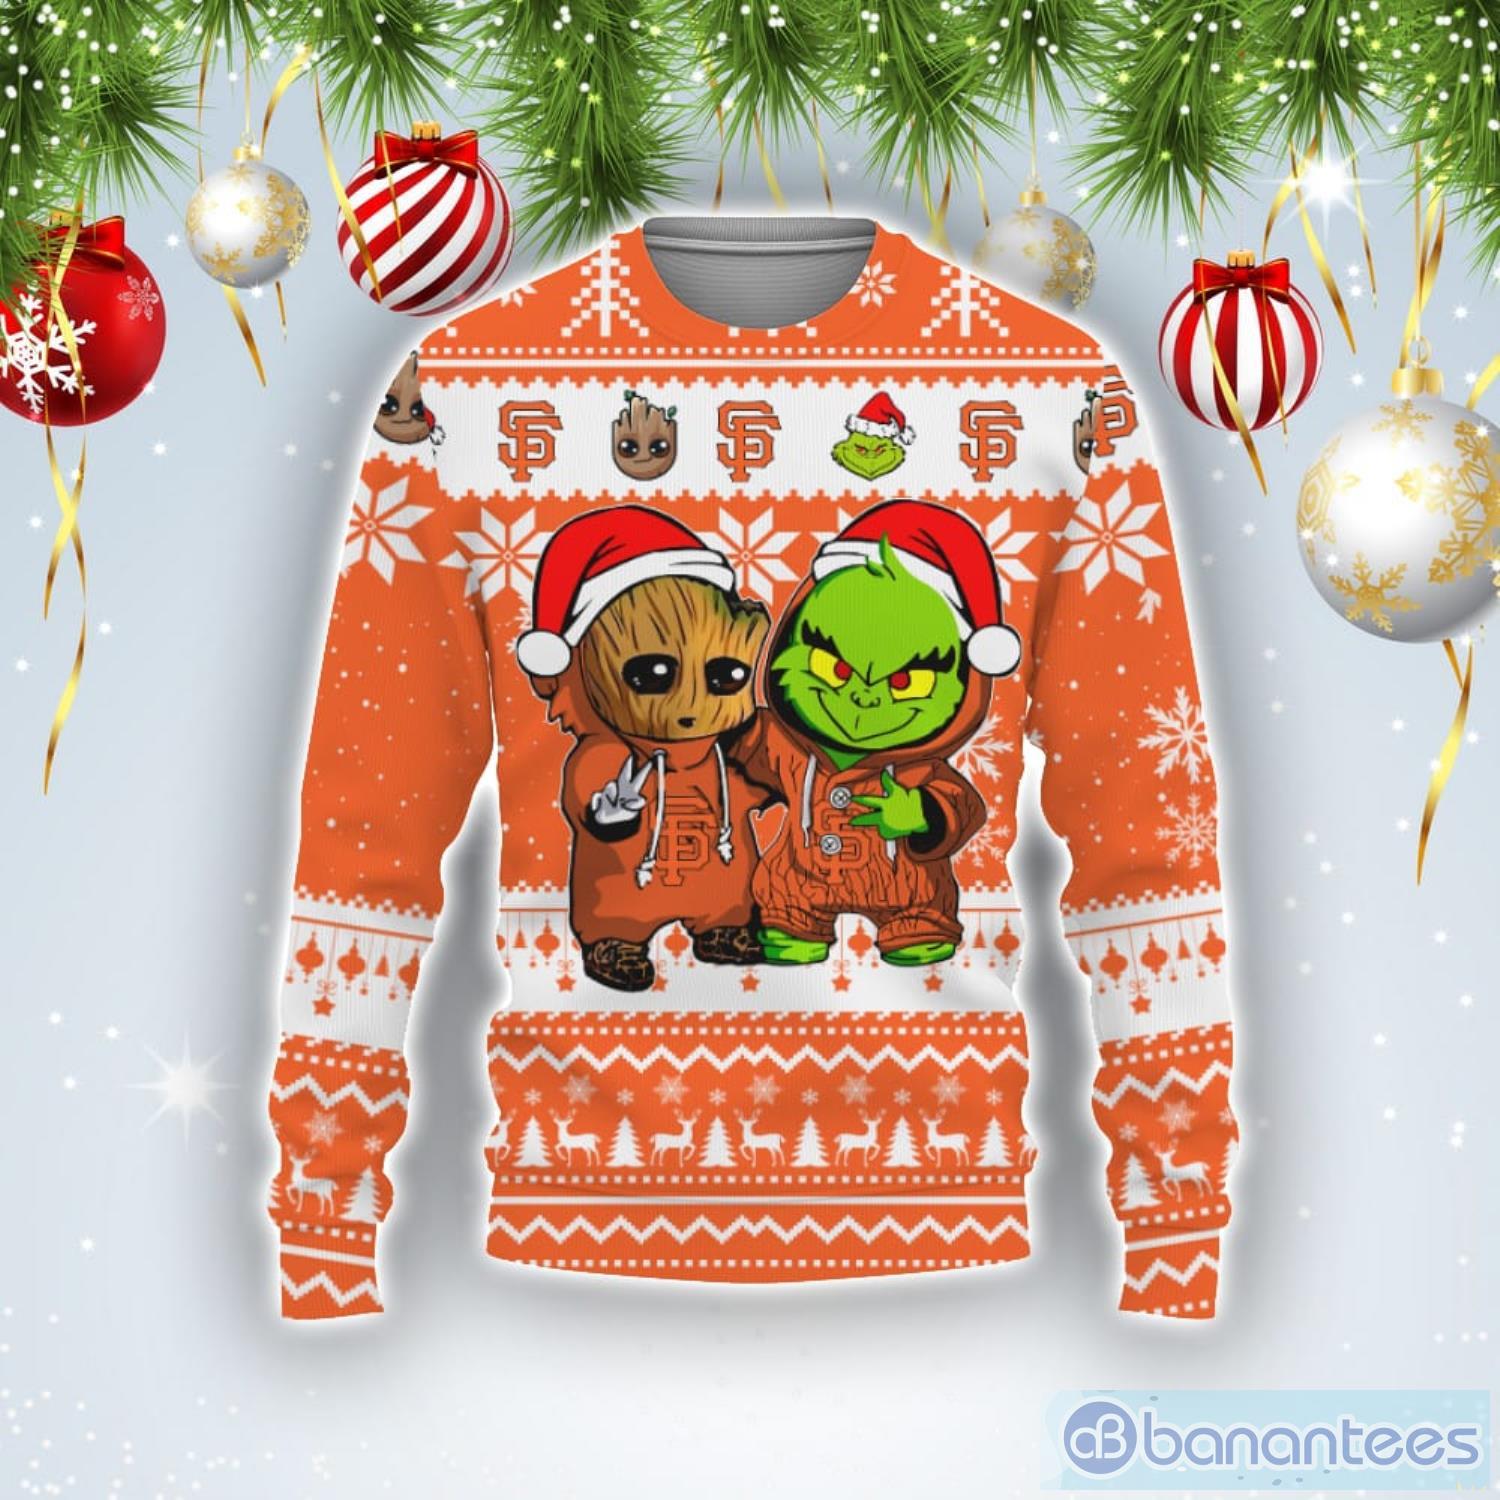 San Francisco Giants Baby Groot And Grinch Best Friends Football American Ugly Christmas Sweater Product Photo 1